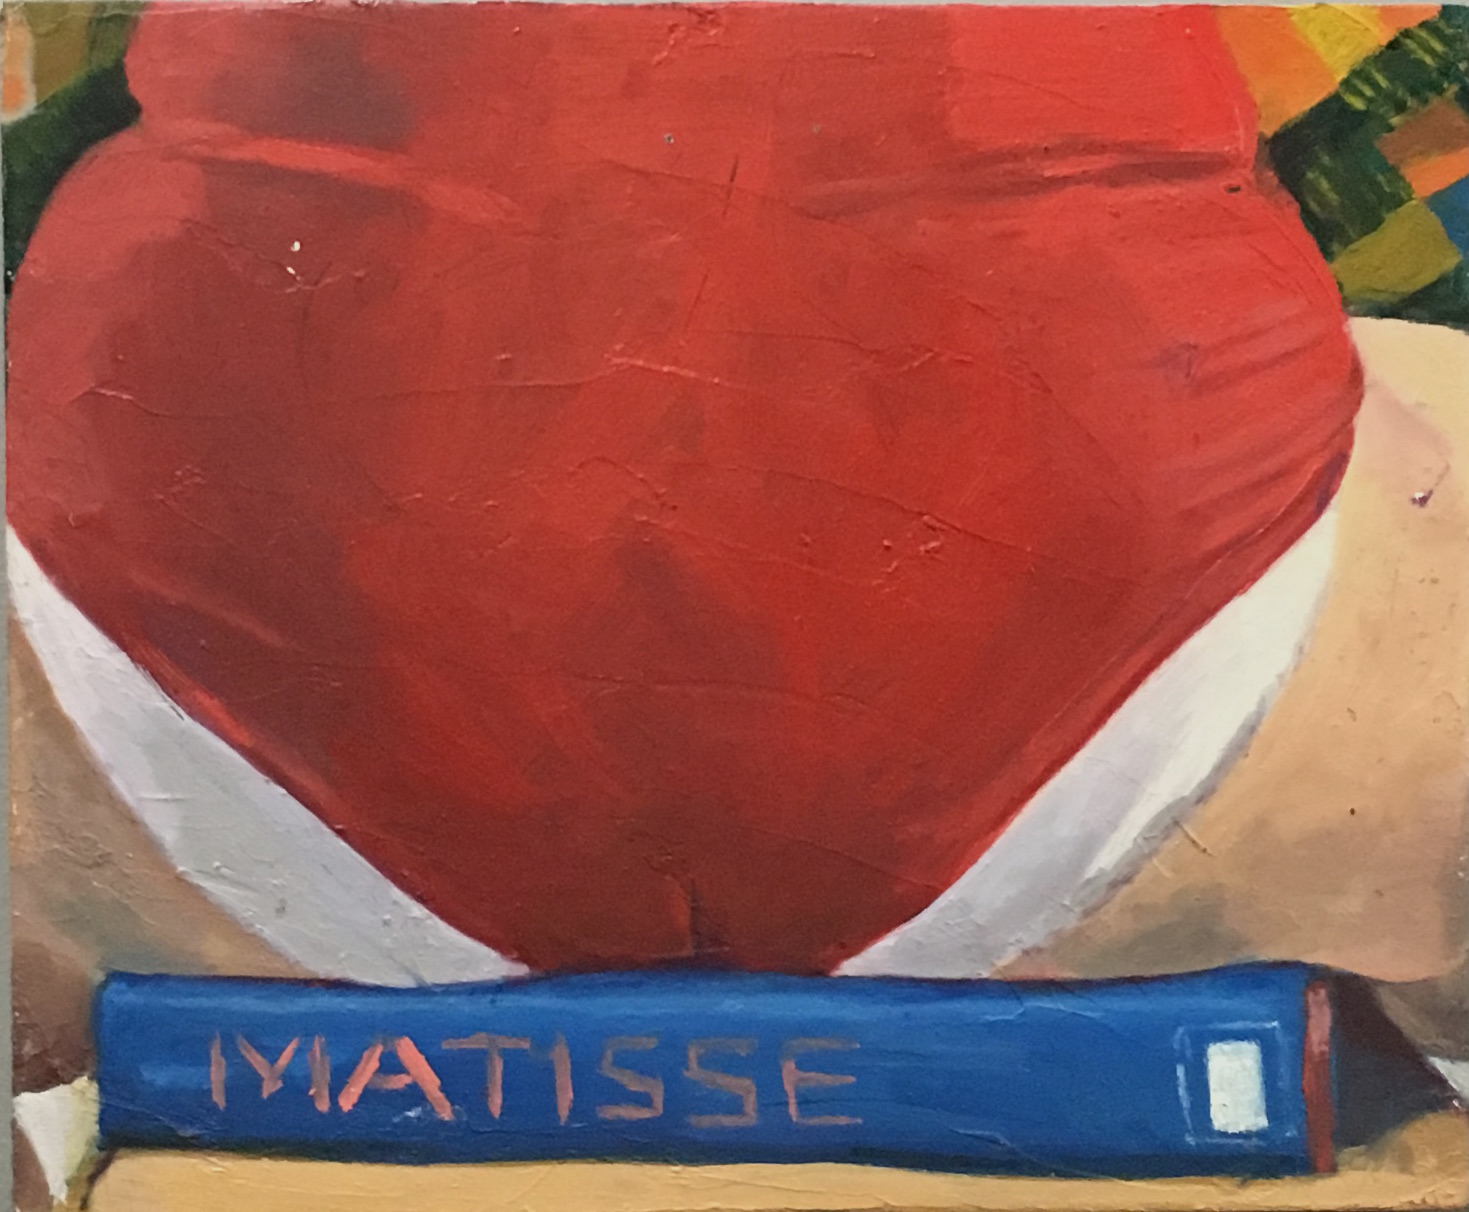   My Butt on Matisse , 2015. Oil on canvas mounted on board.&nbsp; 